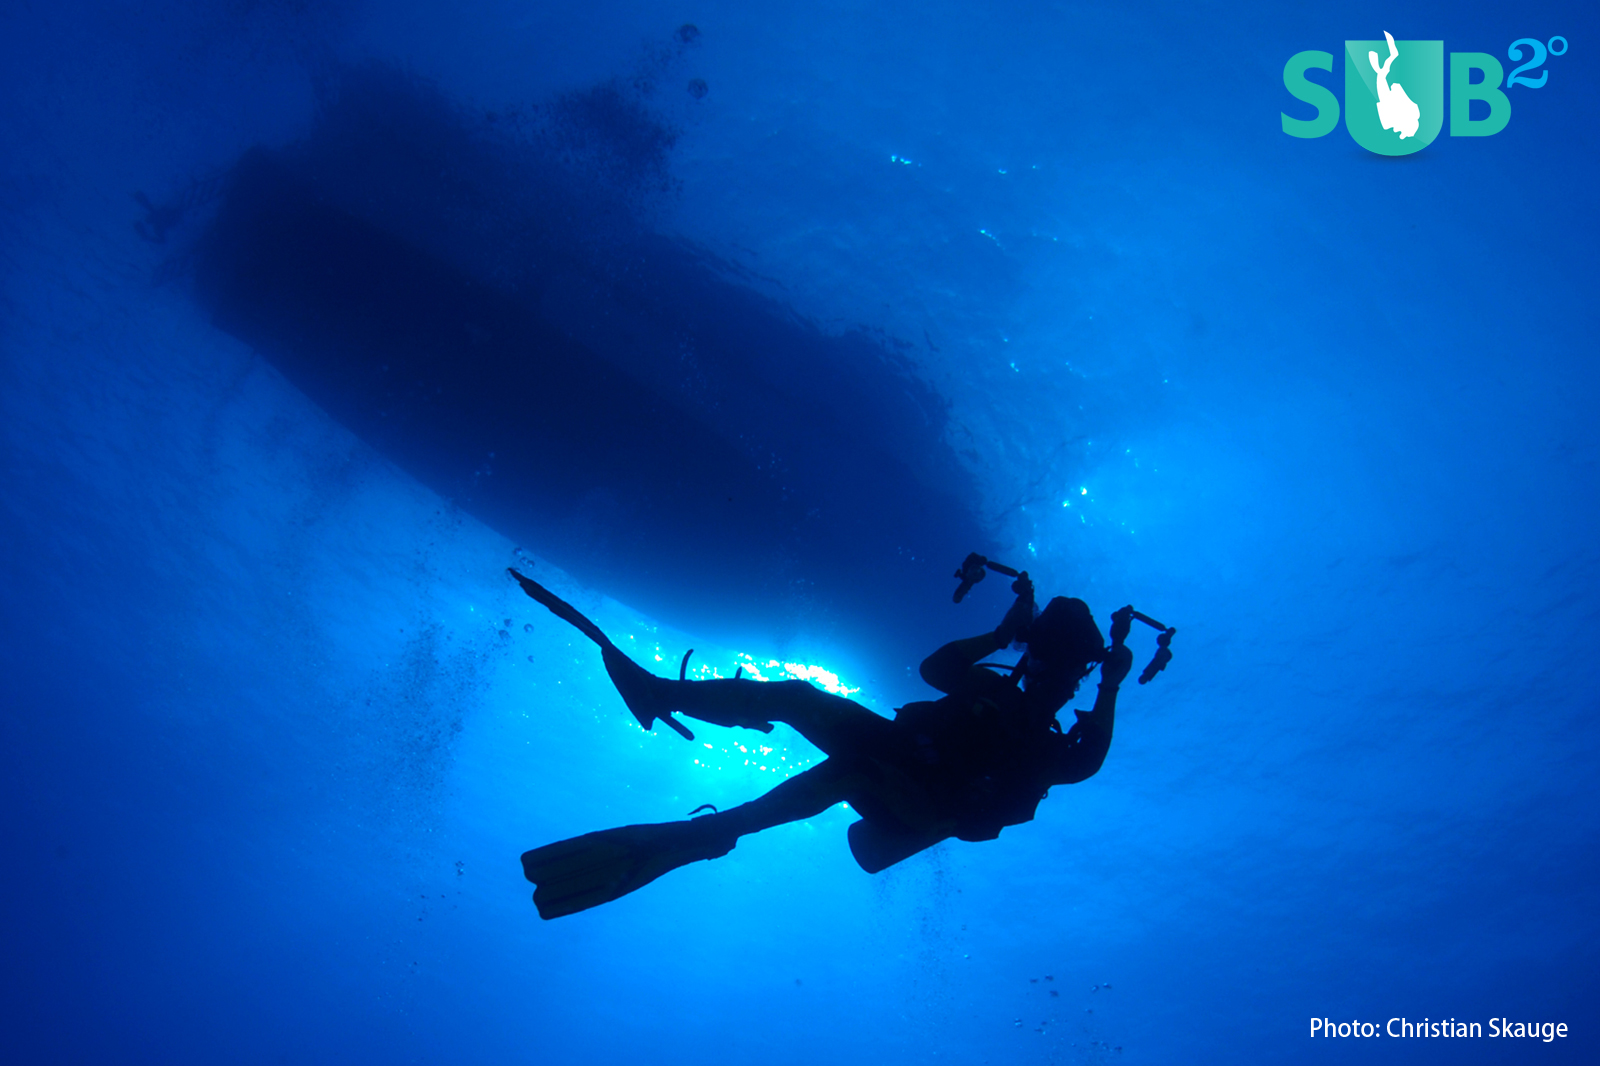 A diver in perfect silhouette against the blue water, with the dive boat at the surface.